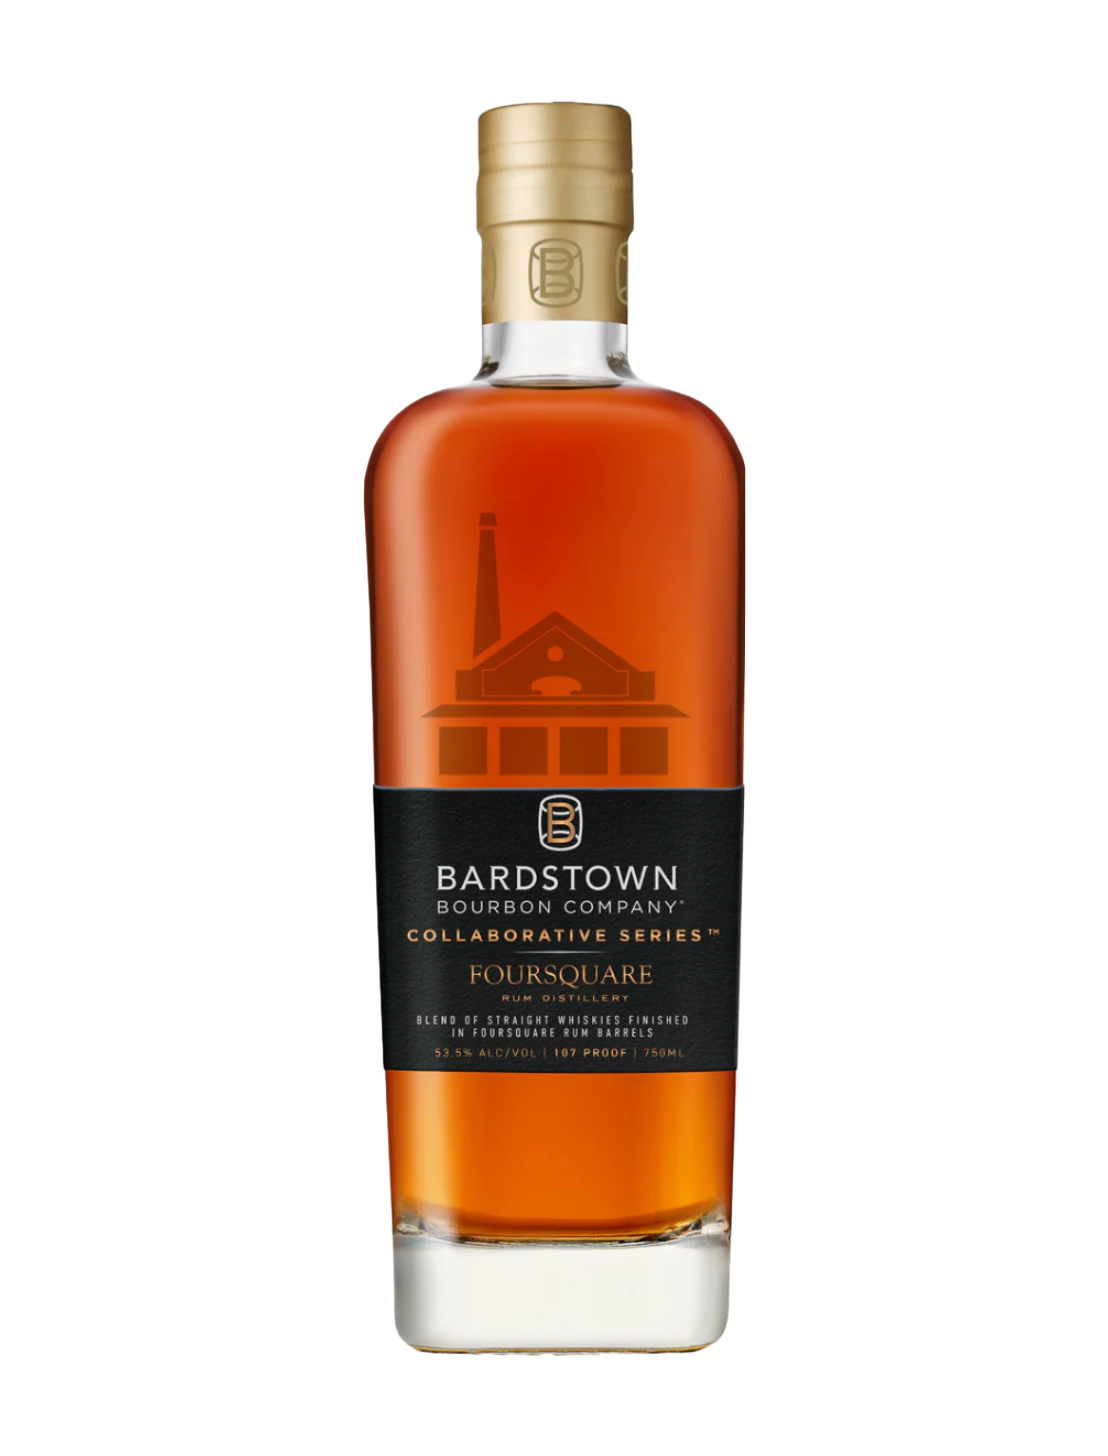 An elegant bottle of Bardstown Bourbon Company Chateau de Laubade II in front of a plain, white background